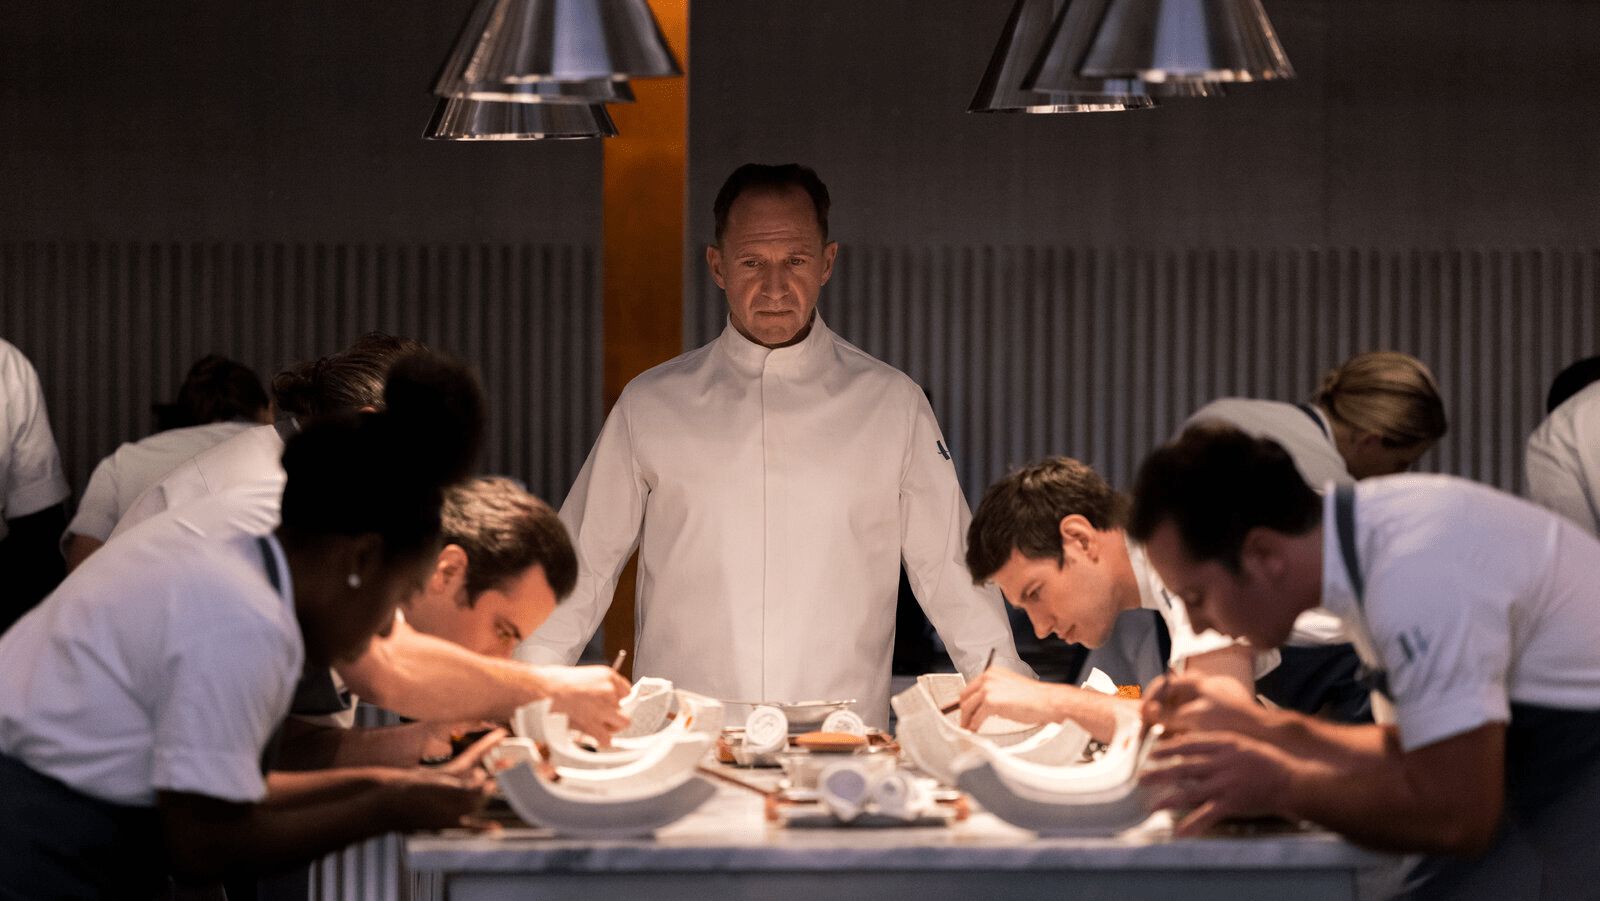 The Menu&#8217;s Ending Served Up More Twists Than a Stallone Stunt